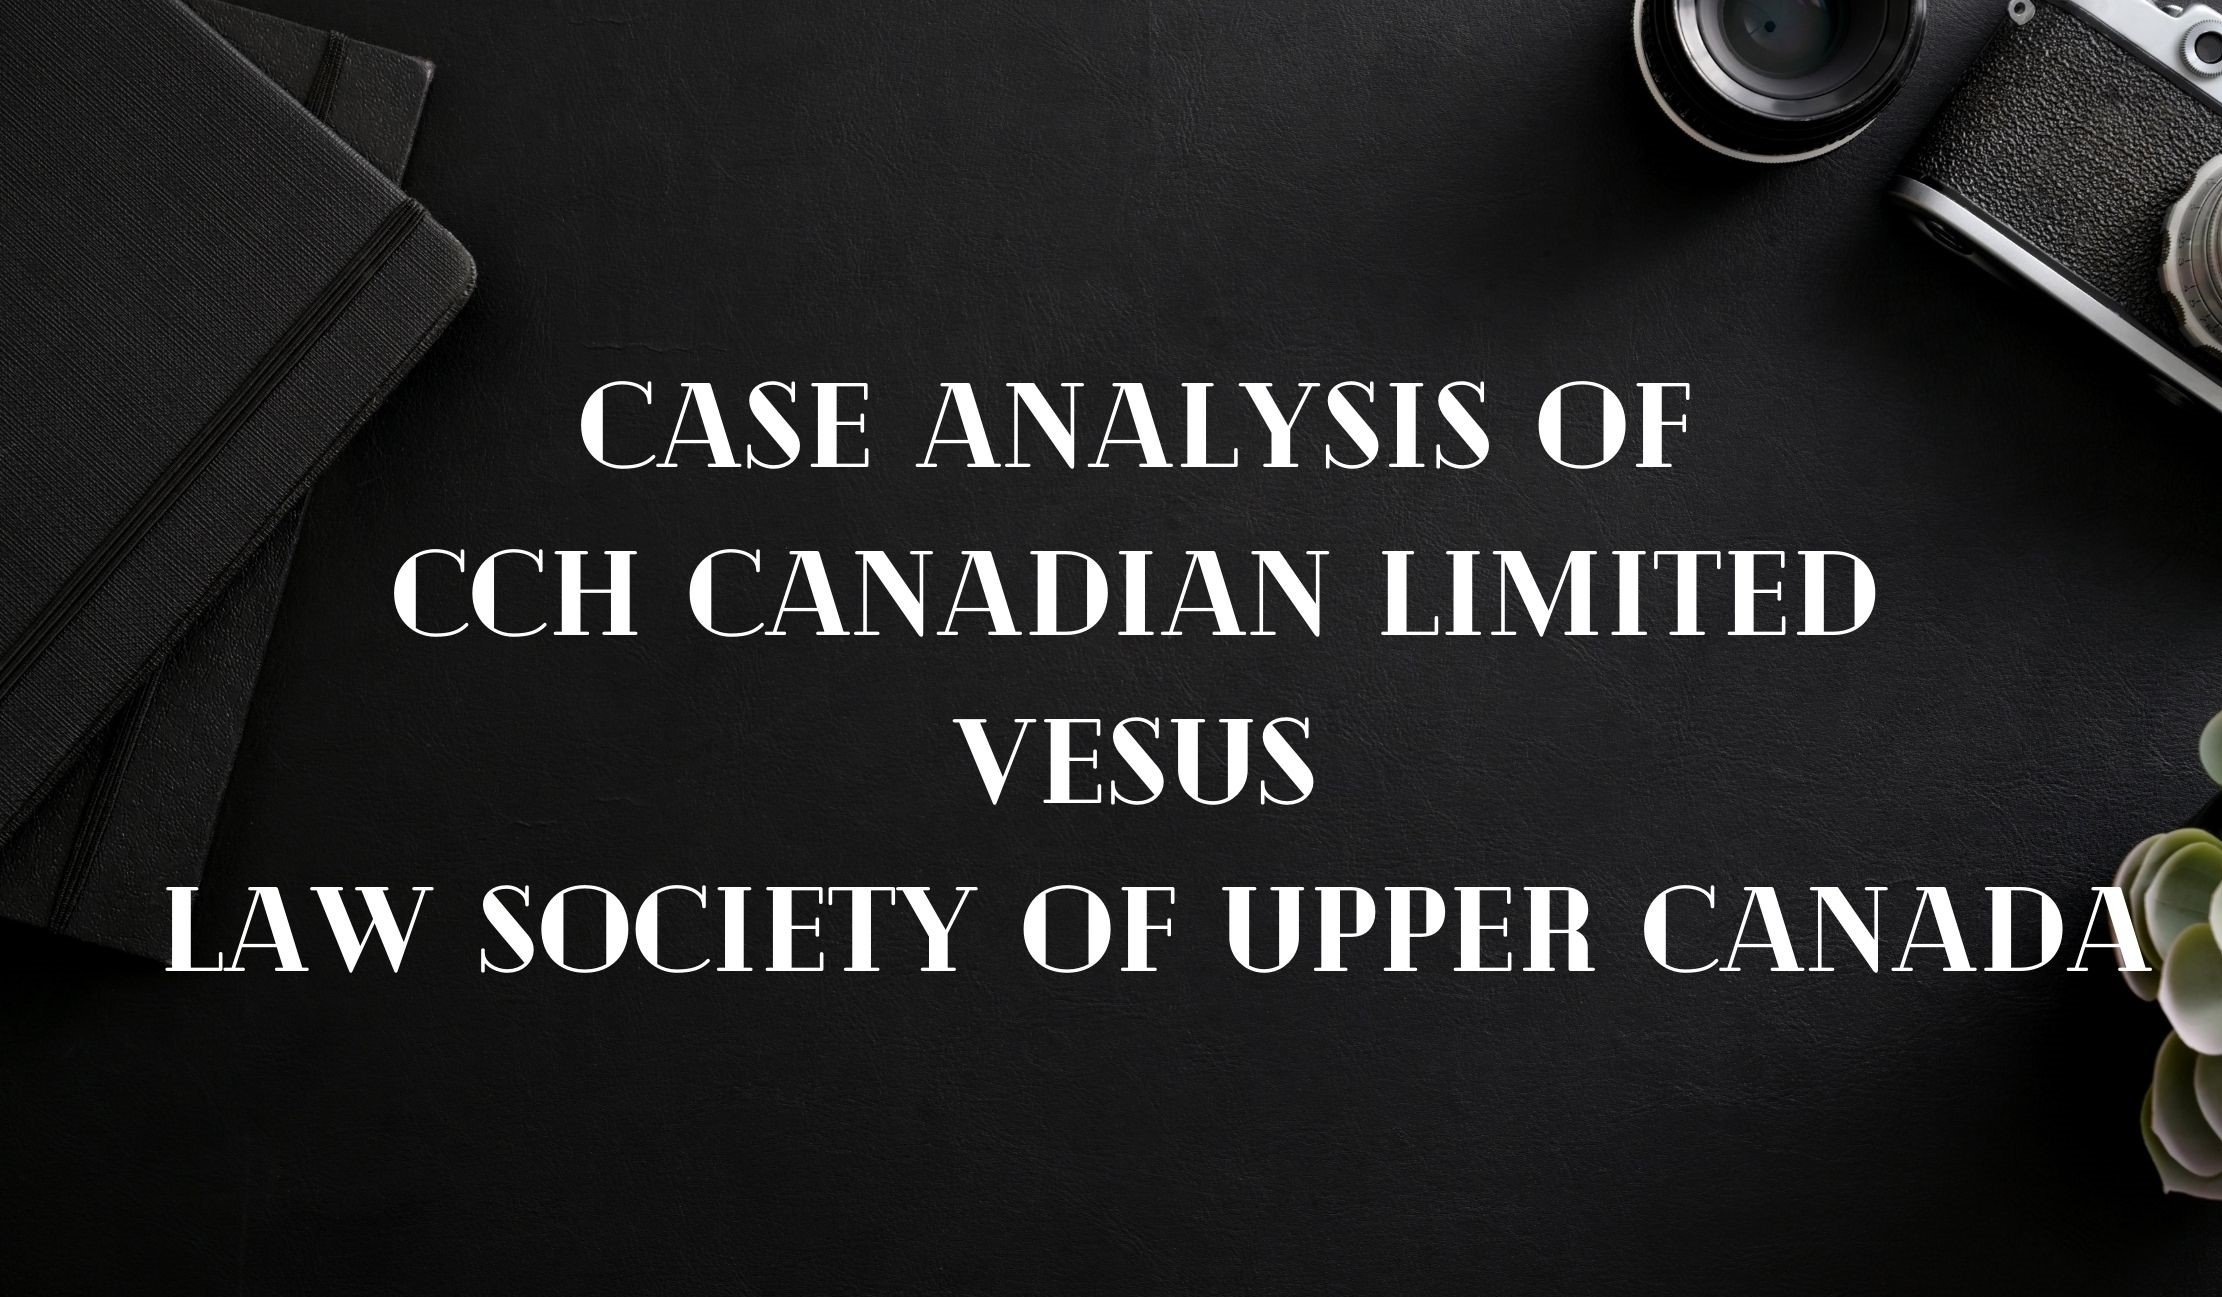 CASE ANALYSIS  "CCH CANADIAN LIMITED VESUS LAW SOCIETY OF UPPER CANADA"